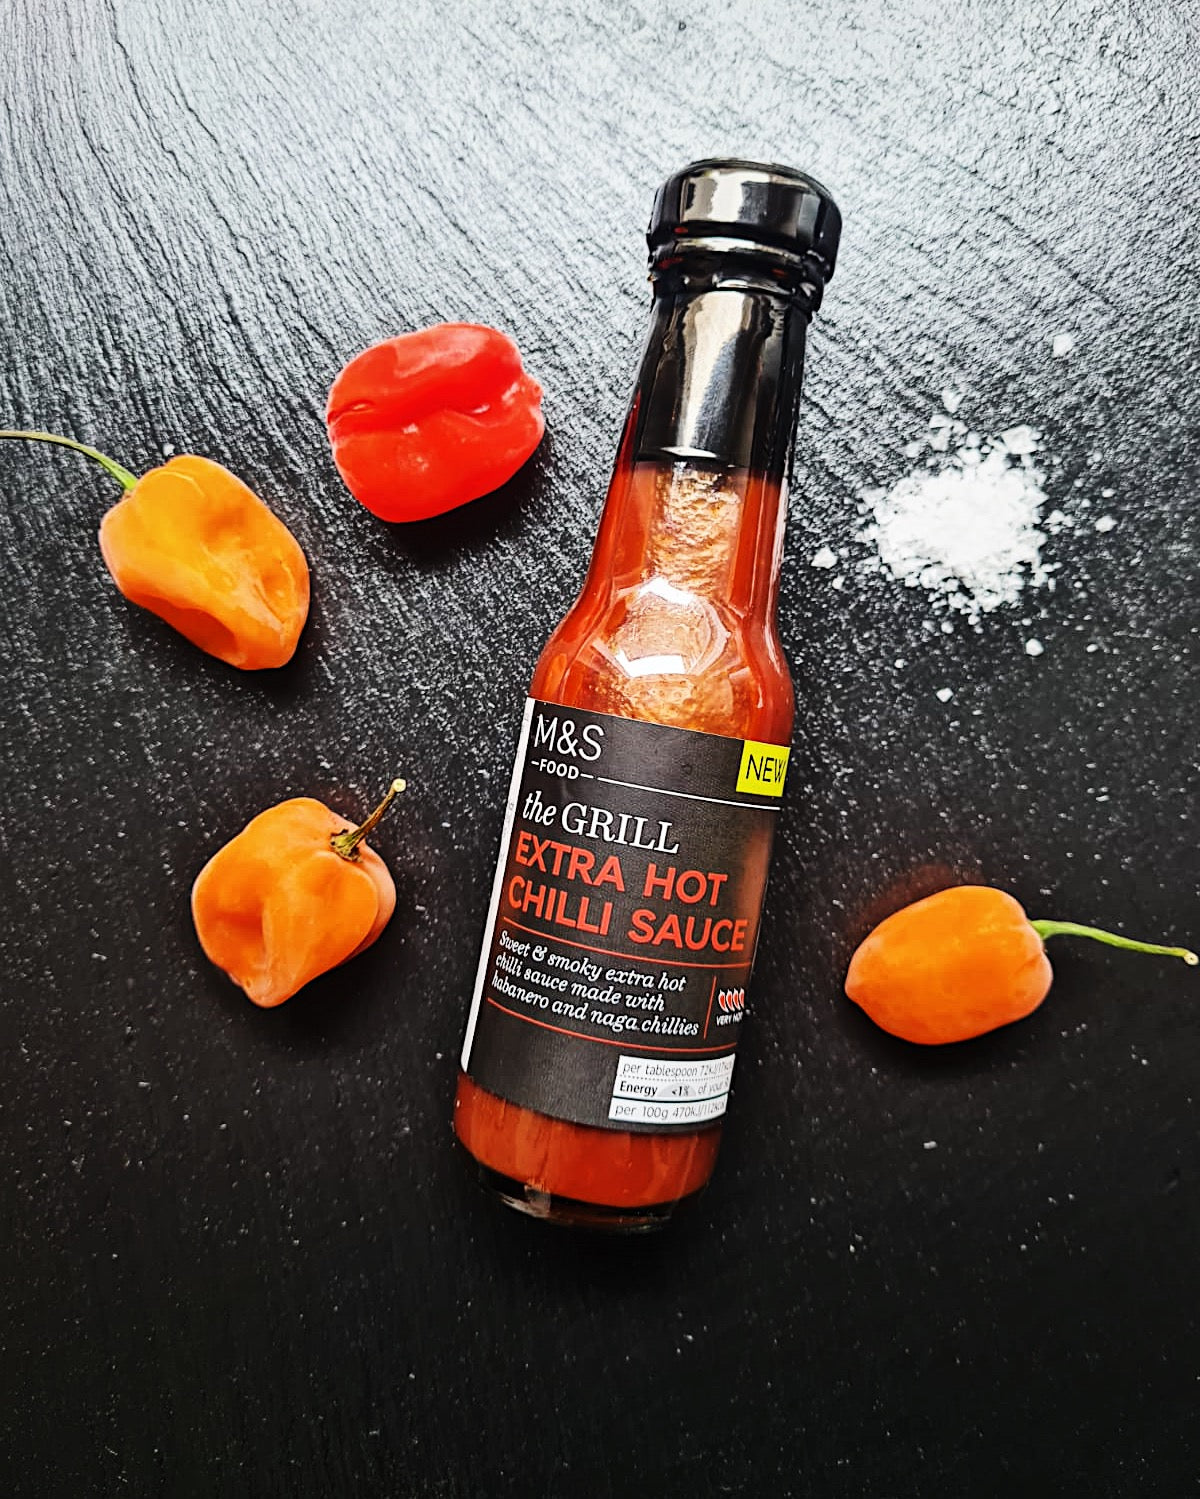 Hot Sauce Review: M&S Extra Hot Chilli Sauce